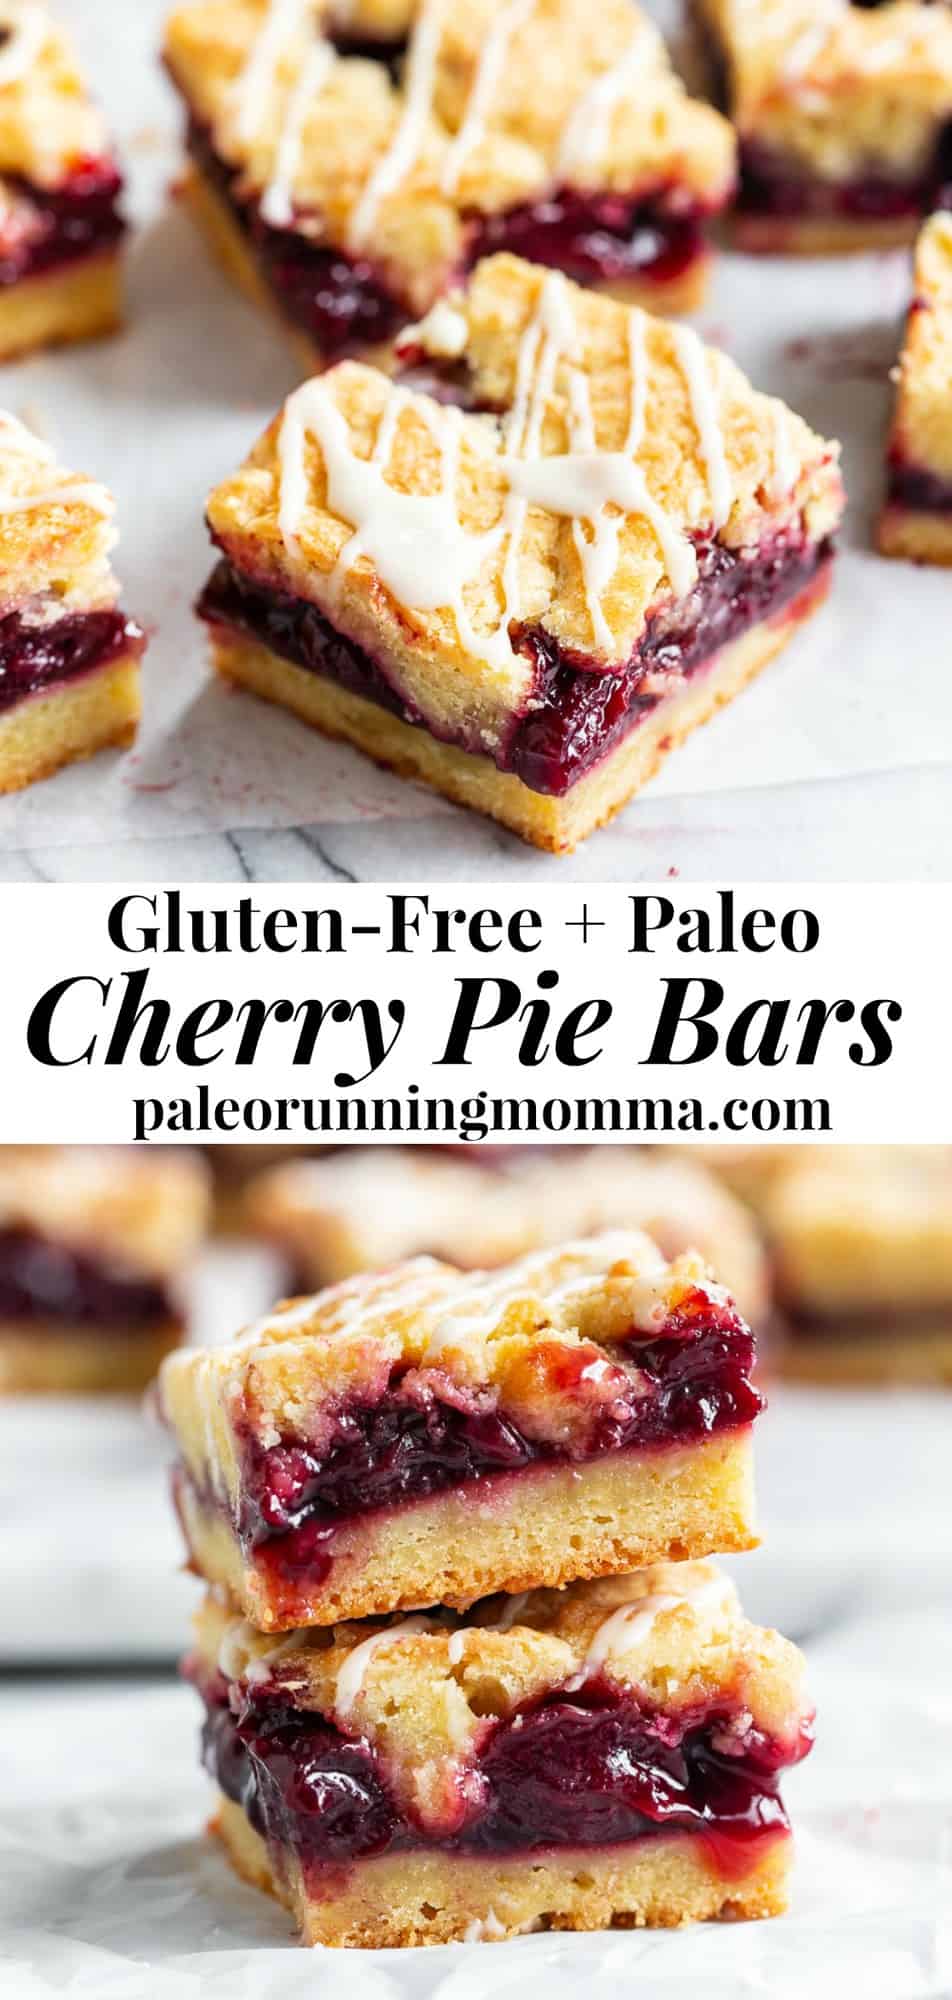 These paleo cherry pie bars have a pastry crust that doubles as a topping, a gooey sweet cherry filling and a maple glaze that's seriously addicting.  Just like a cherry pie but easier to make, they're gluten free, grain free, and have a dairy free option. #paleo #glutenfree 